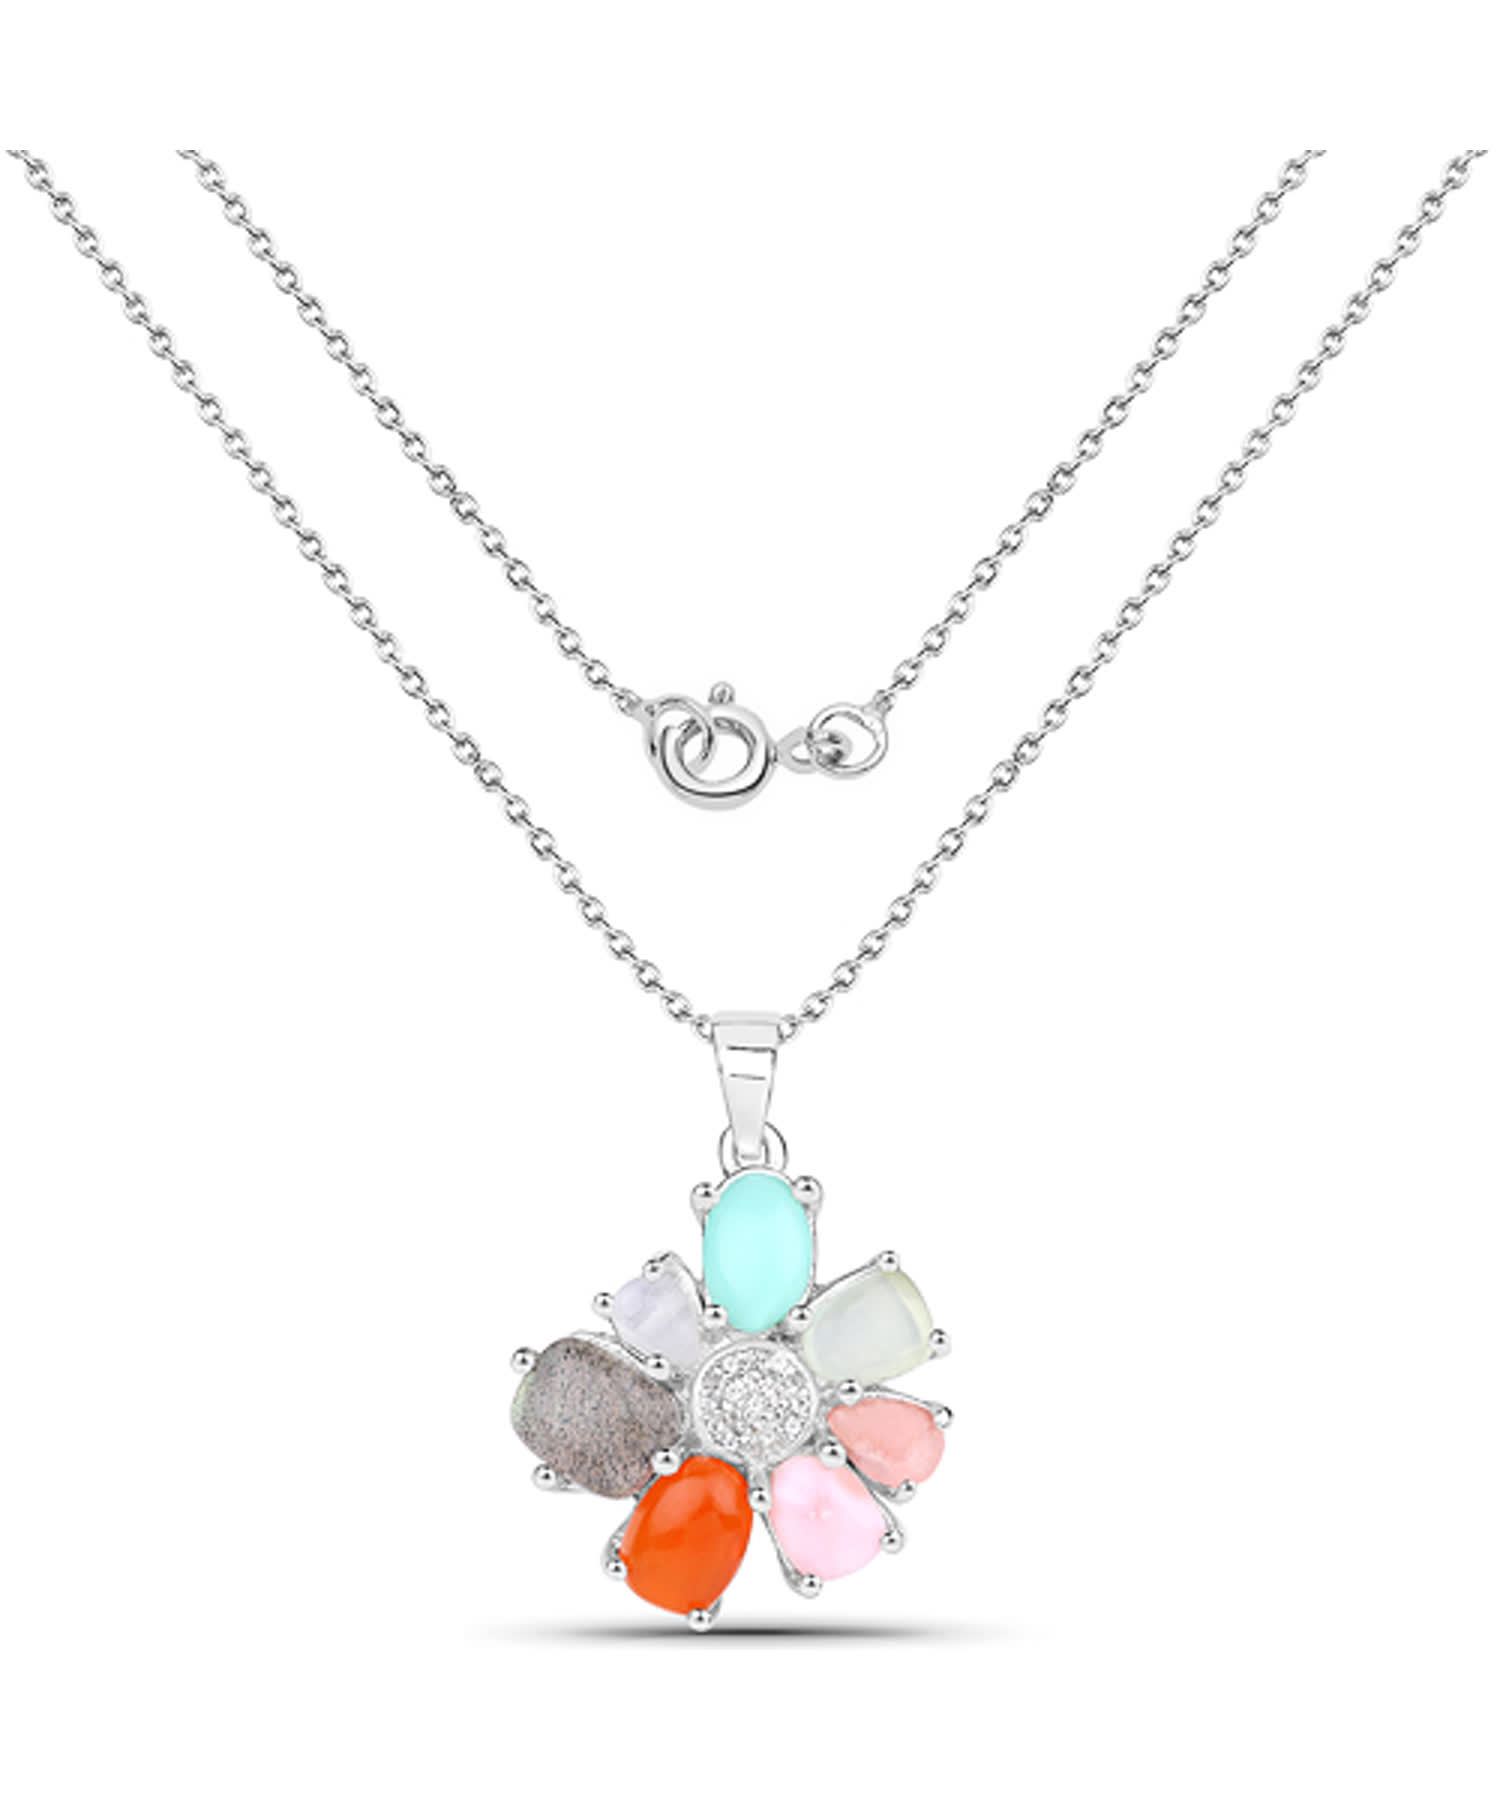 5.11ctw Natural Mixed Gems Rhodium Plated 925 Sterling Silver Pendant With Chain View 2